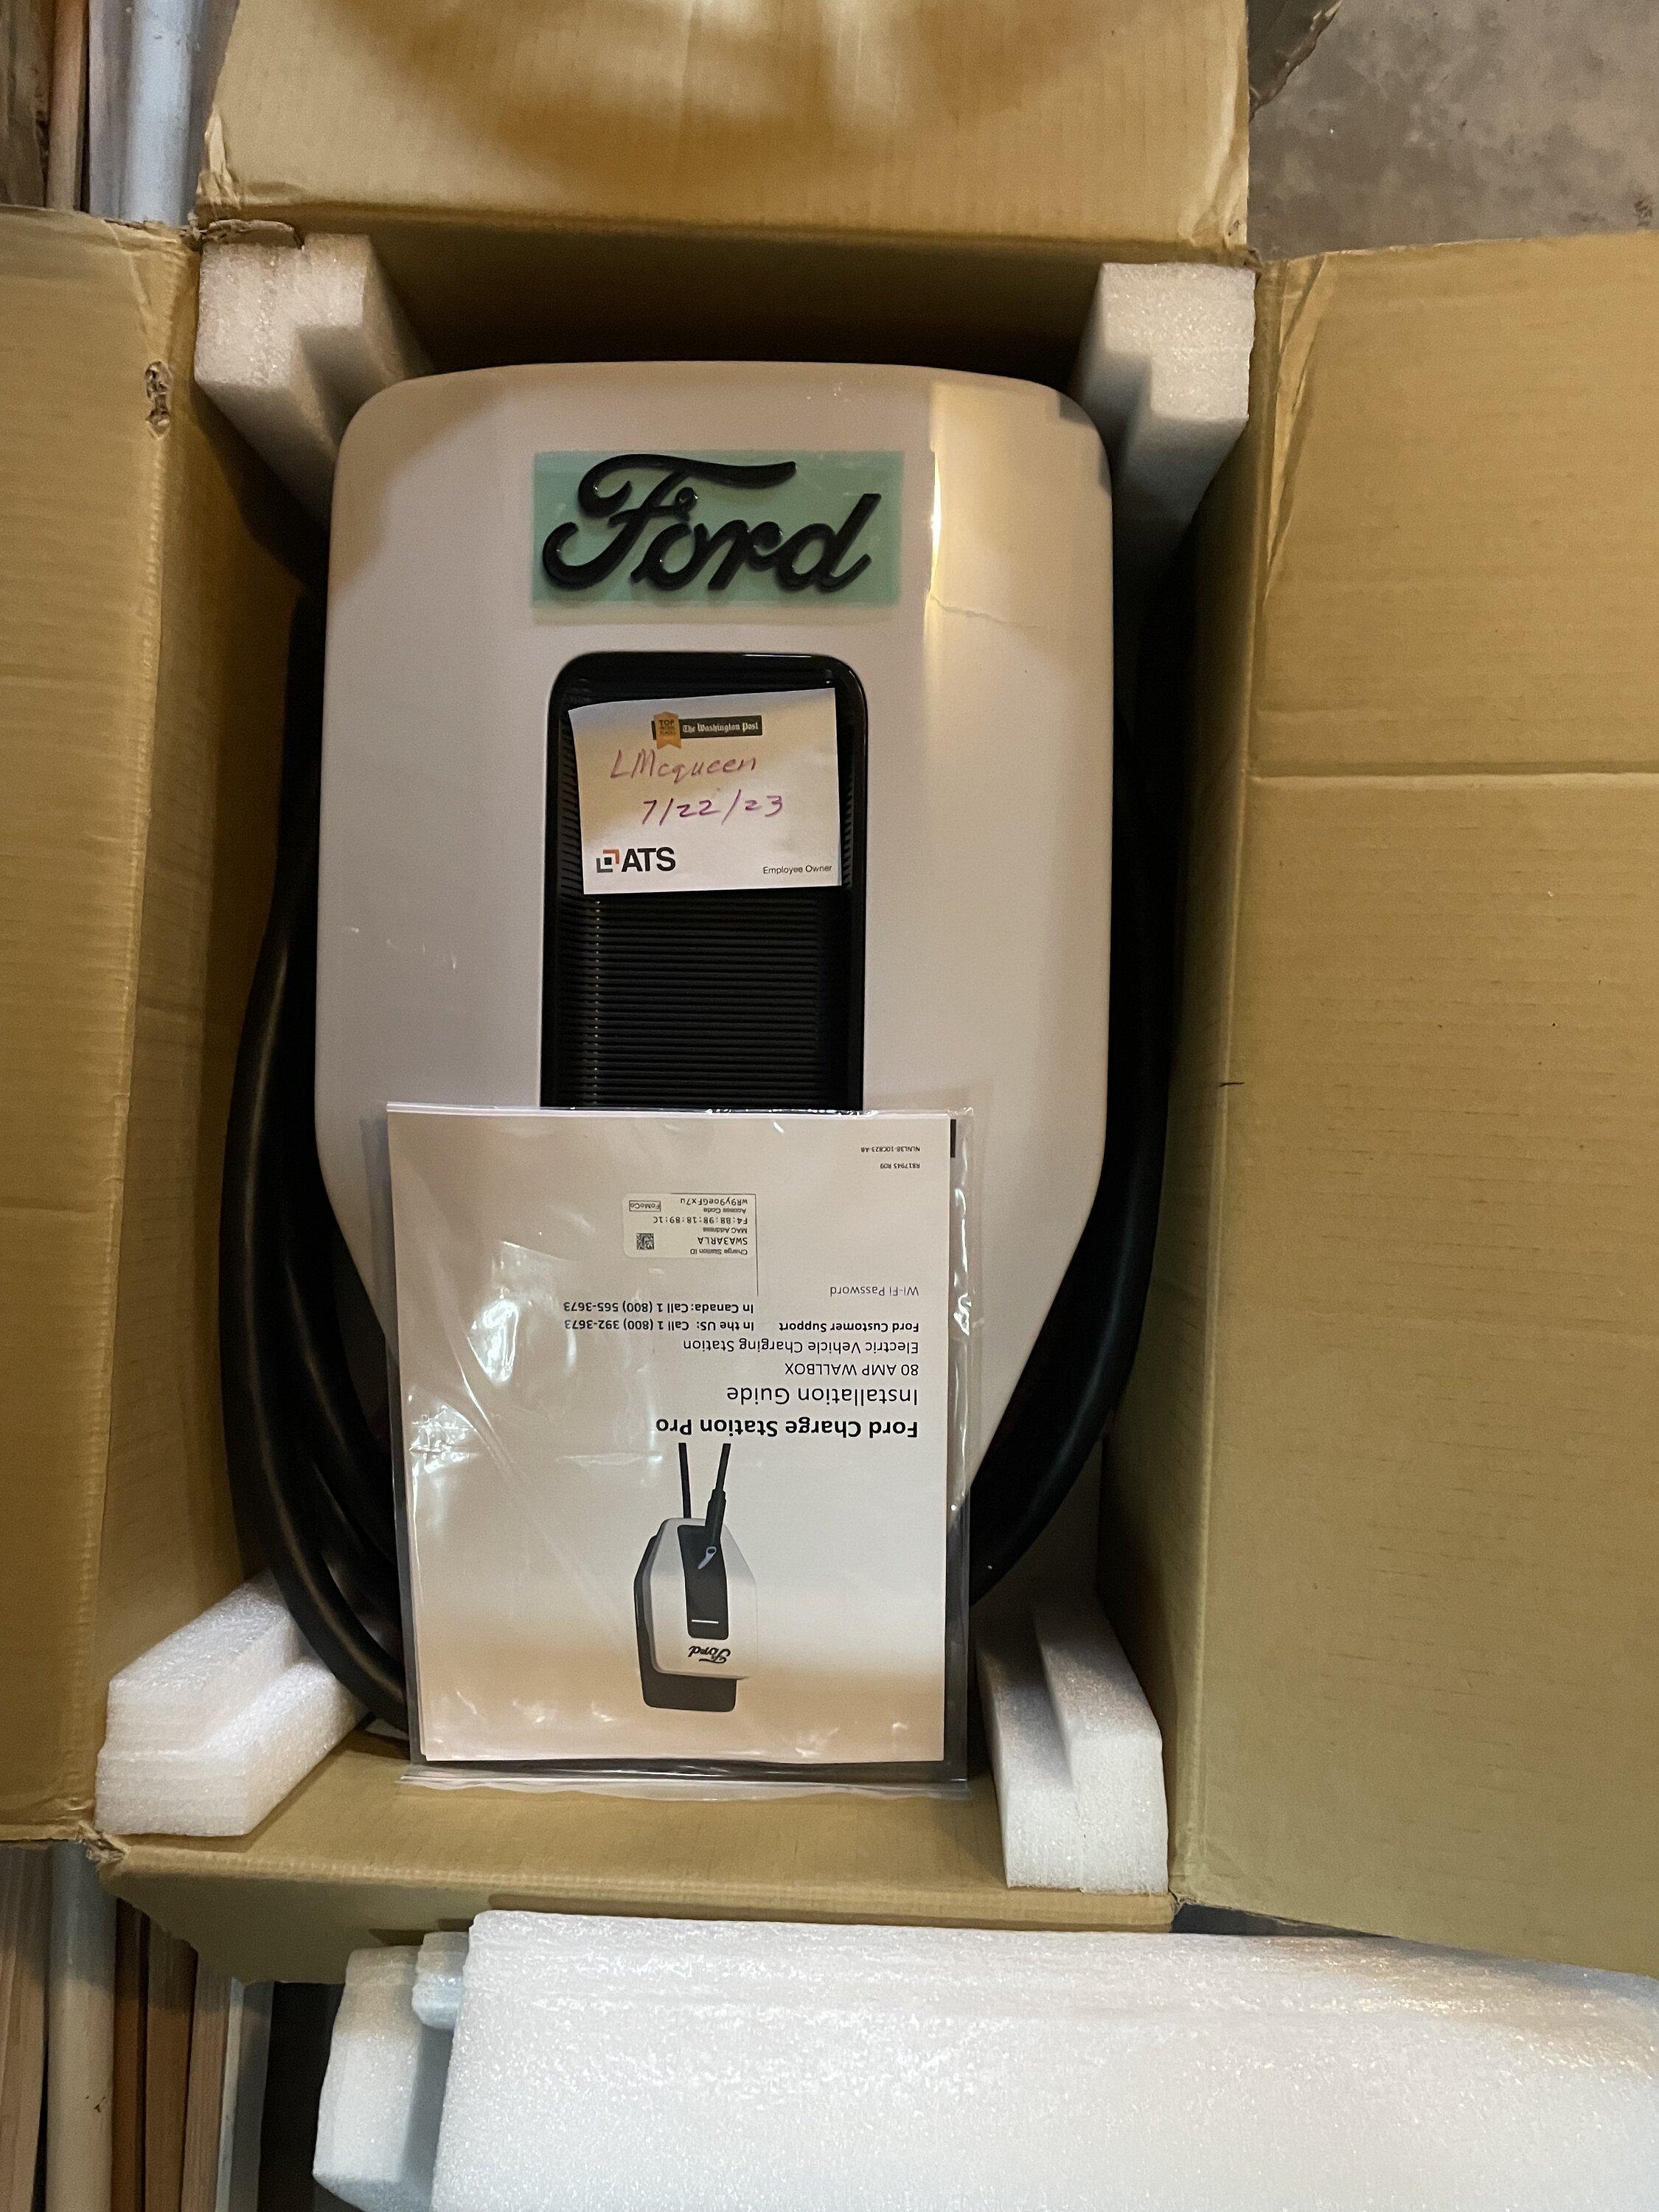 Ford F-150 Lightning Charge Station Pro $650 IMG_9462